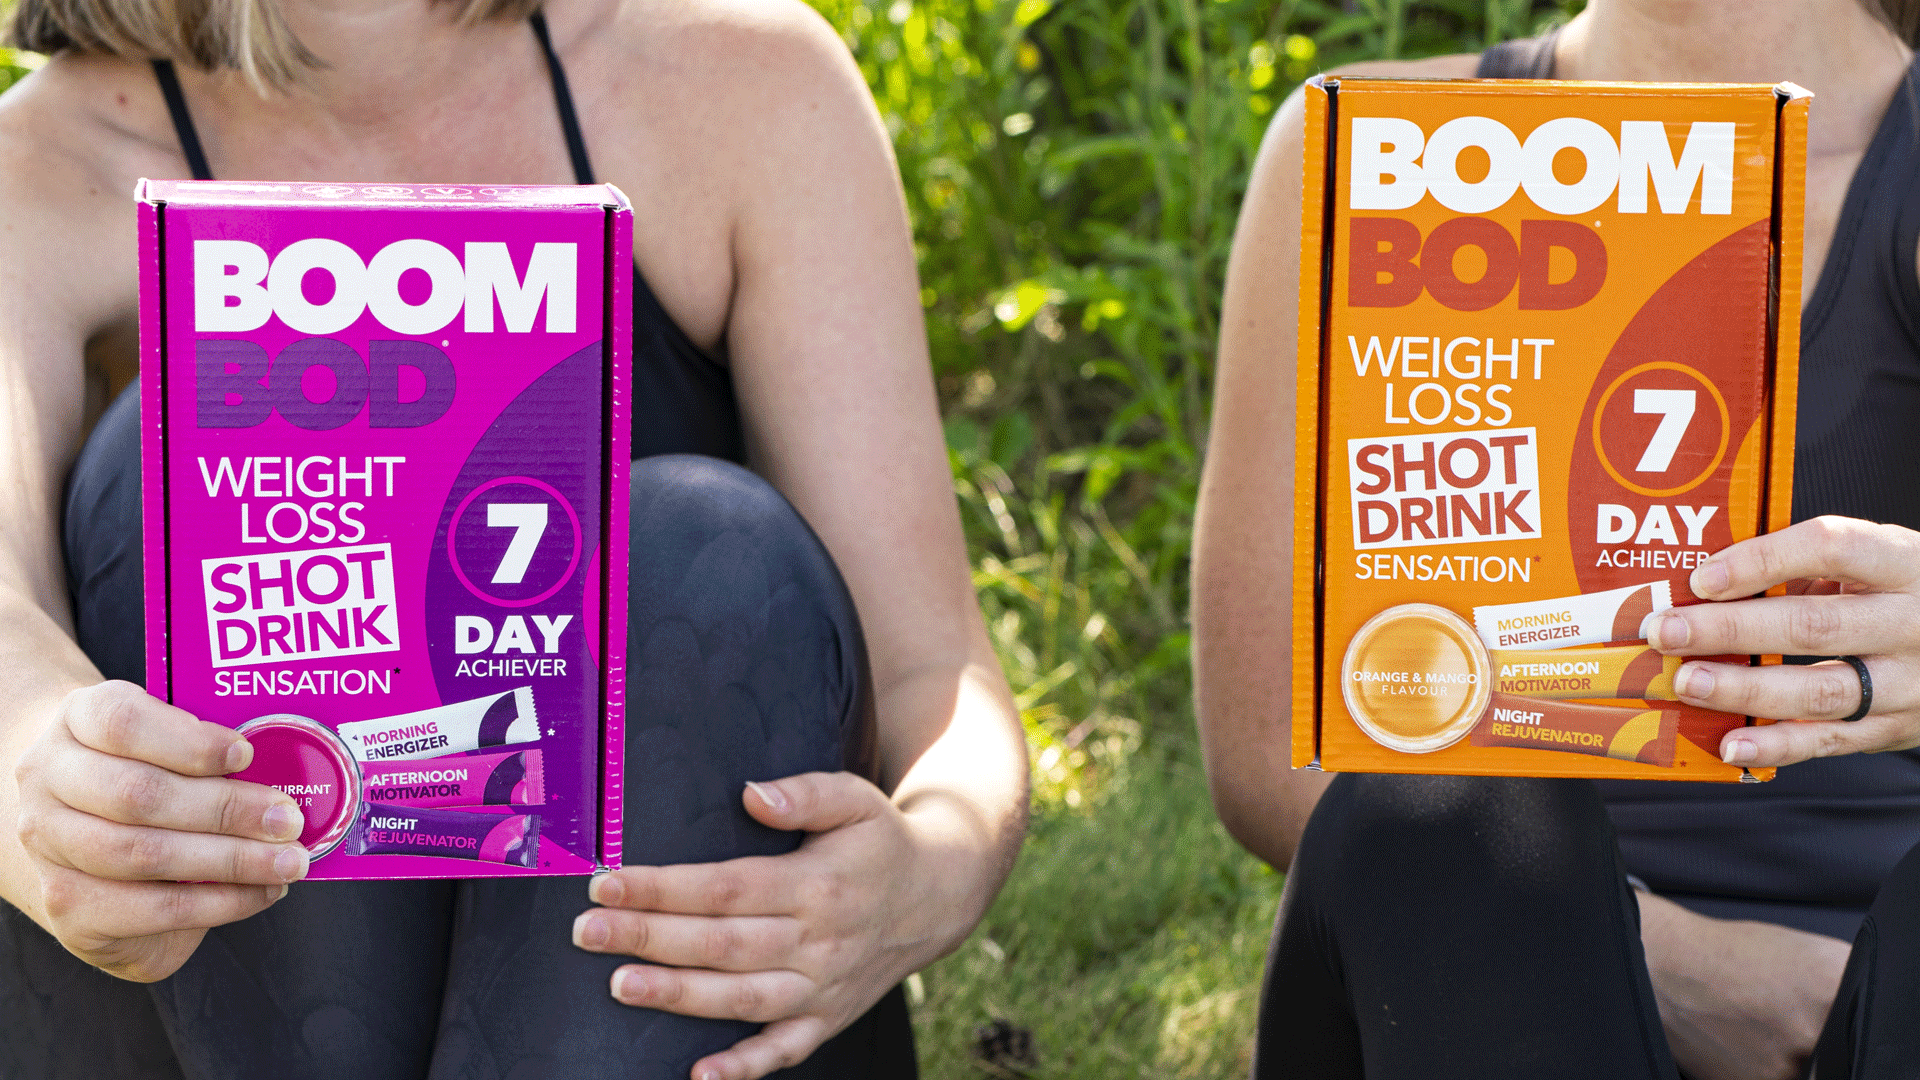 Boombod Weight Loss Shot Drink 14 Day Achievers